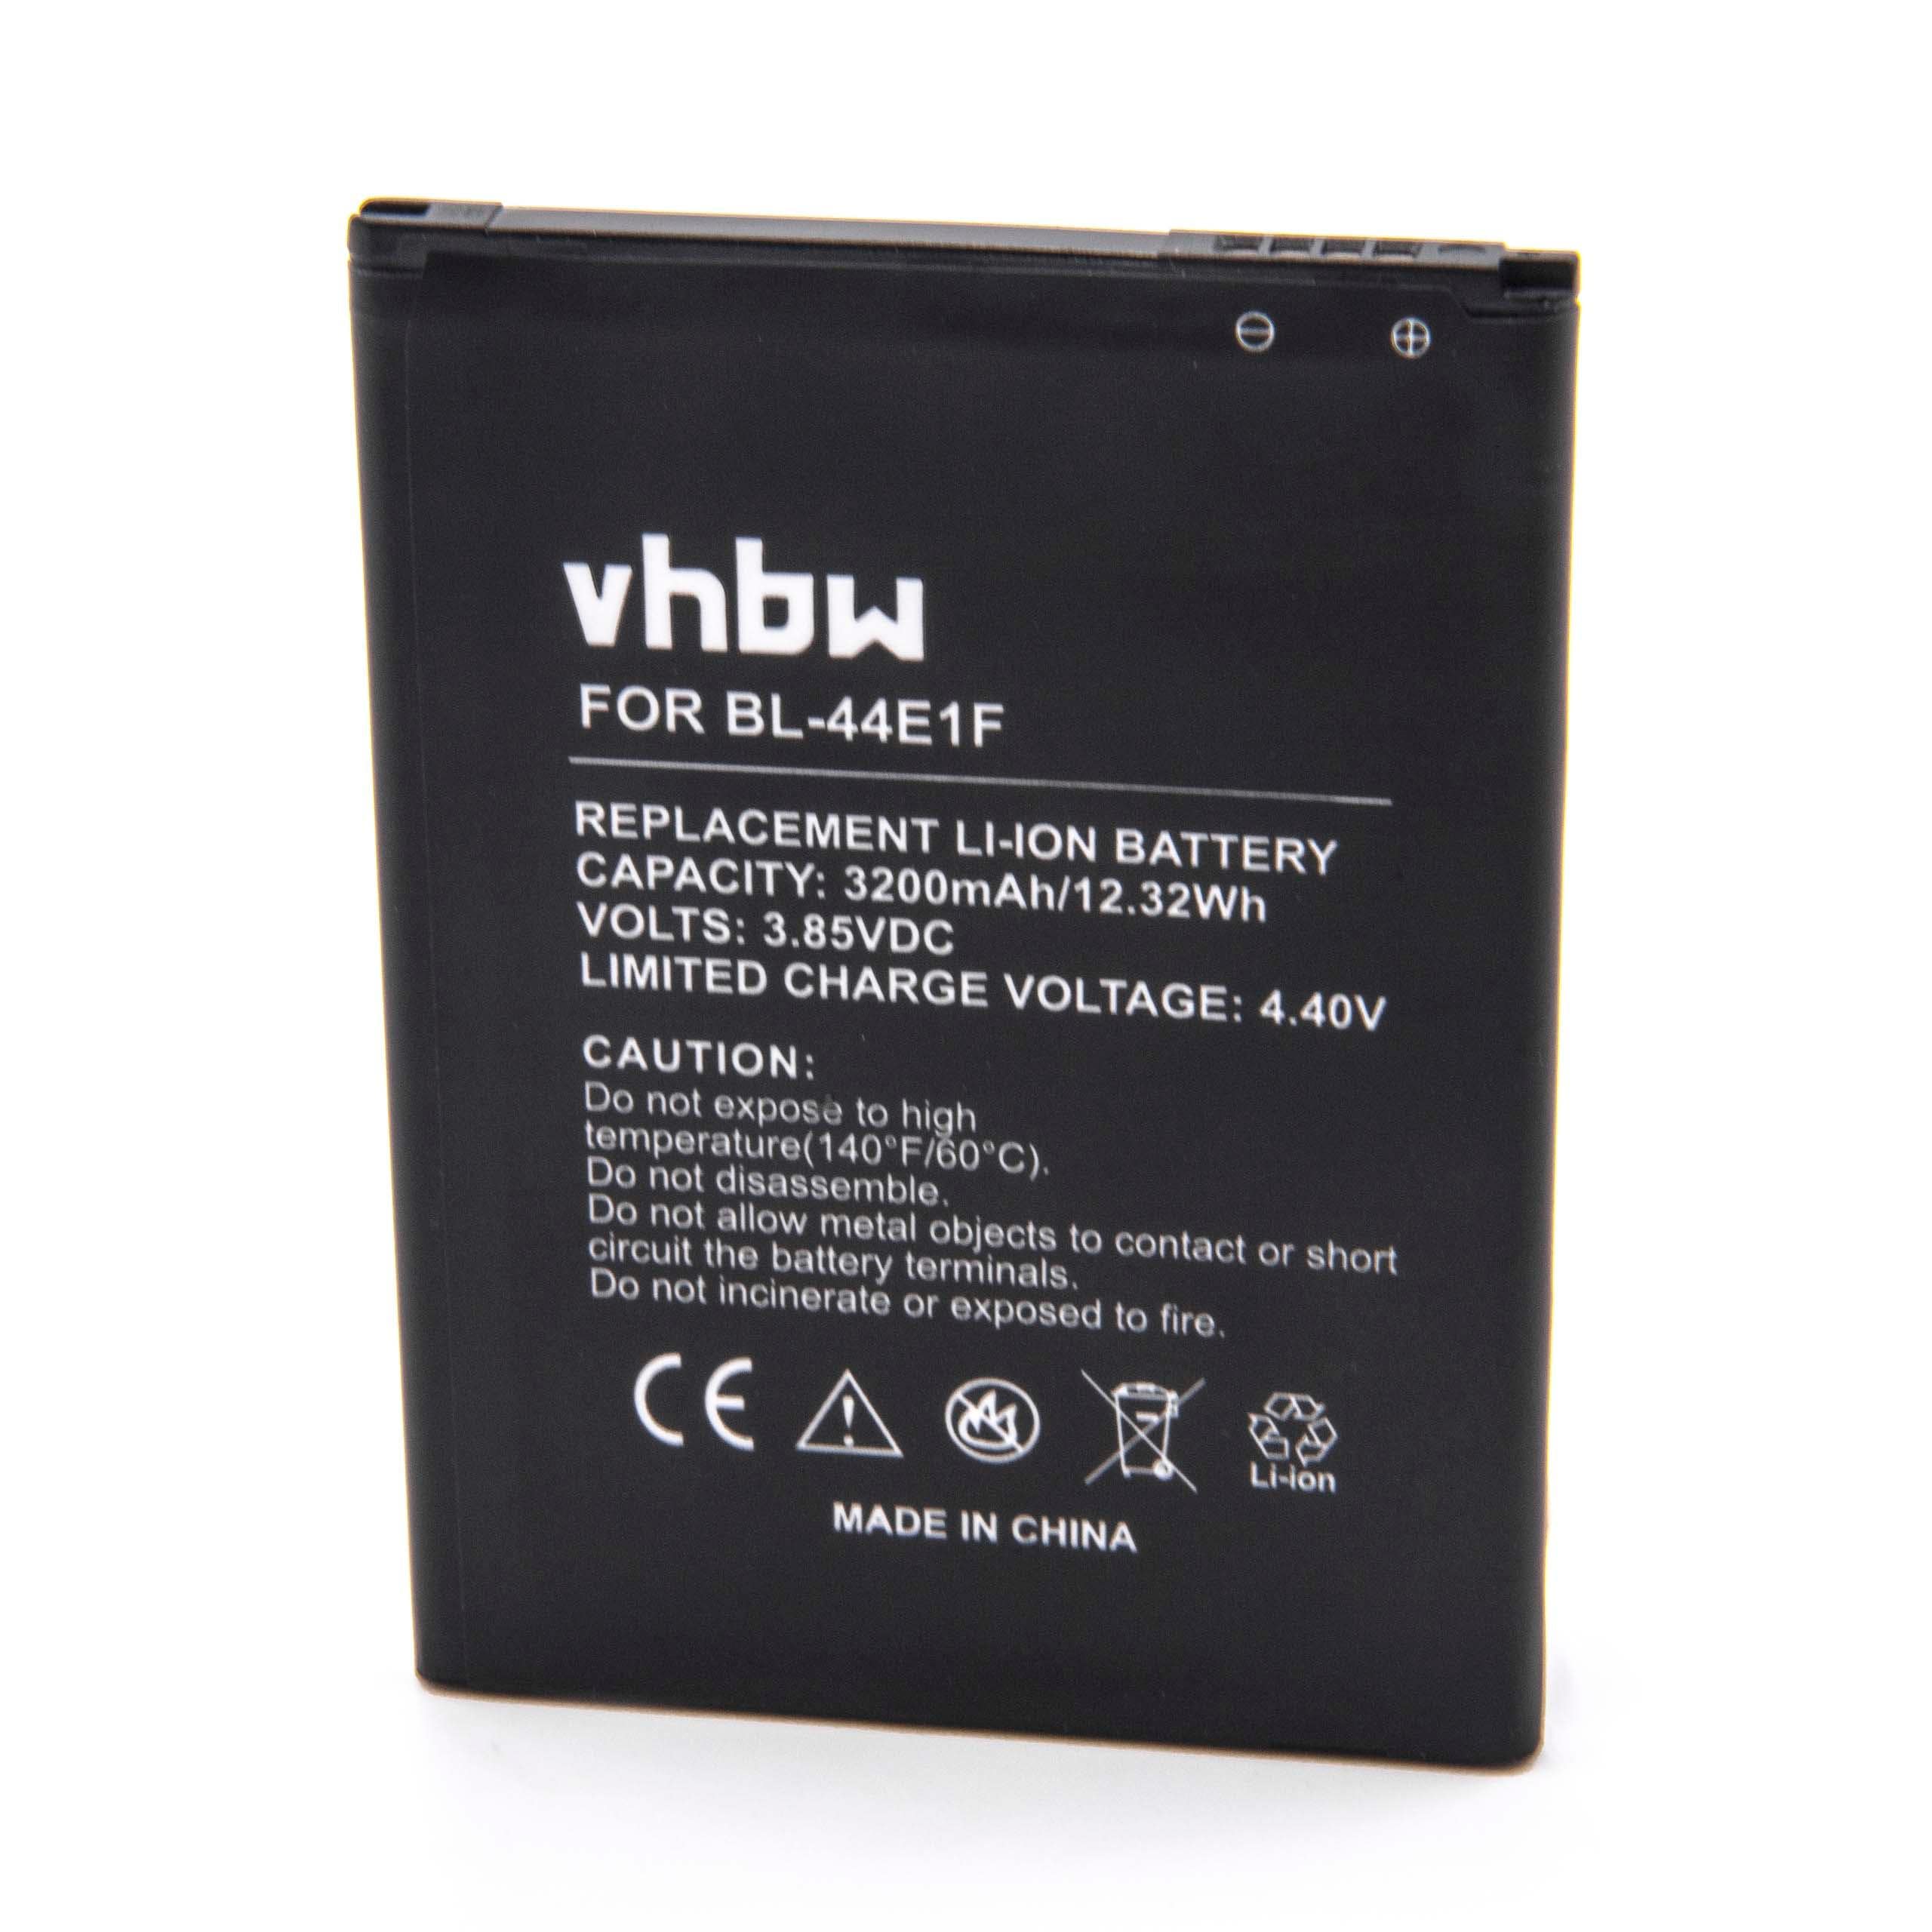 Mobile Phone Battery Replacement for LG PAC63320502, BL-44E1f, EAC63341101 - 3200mAh 3.85V Li-Ion